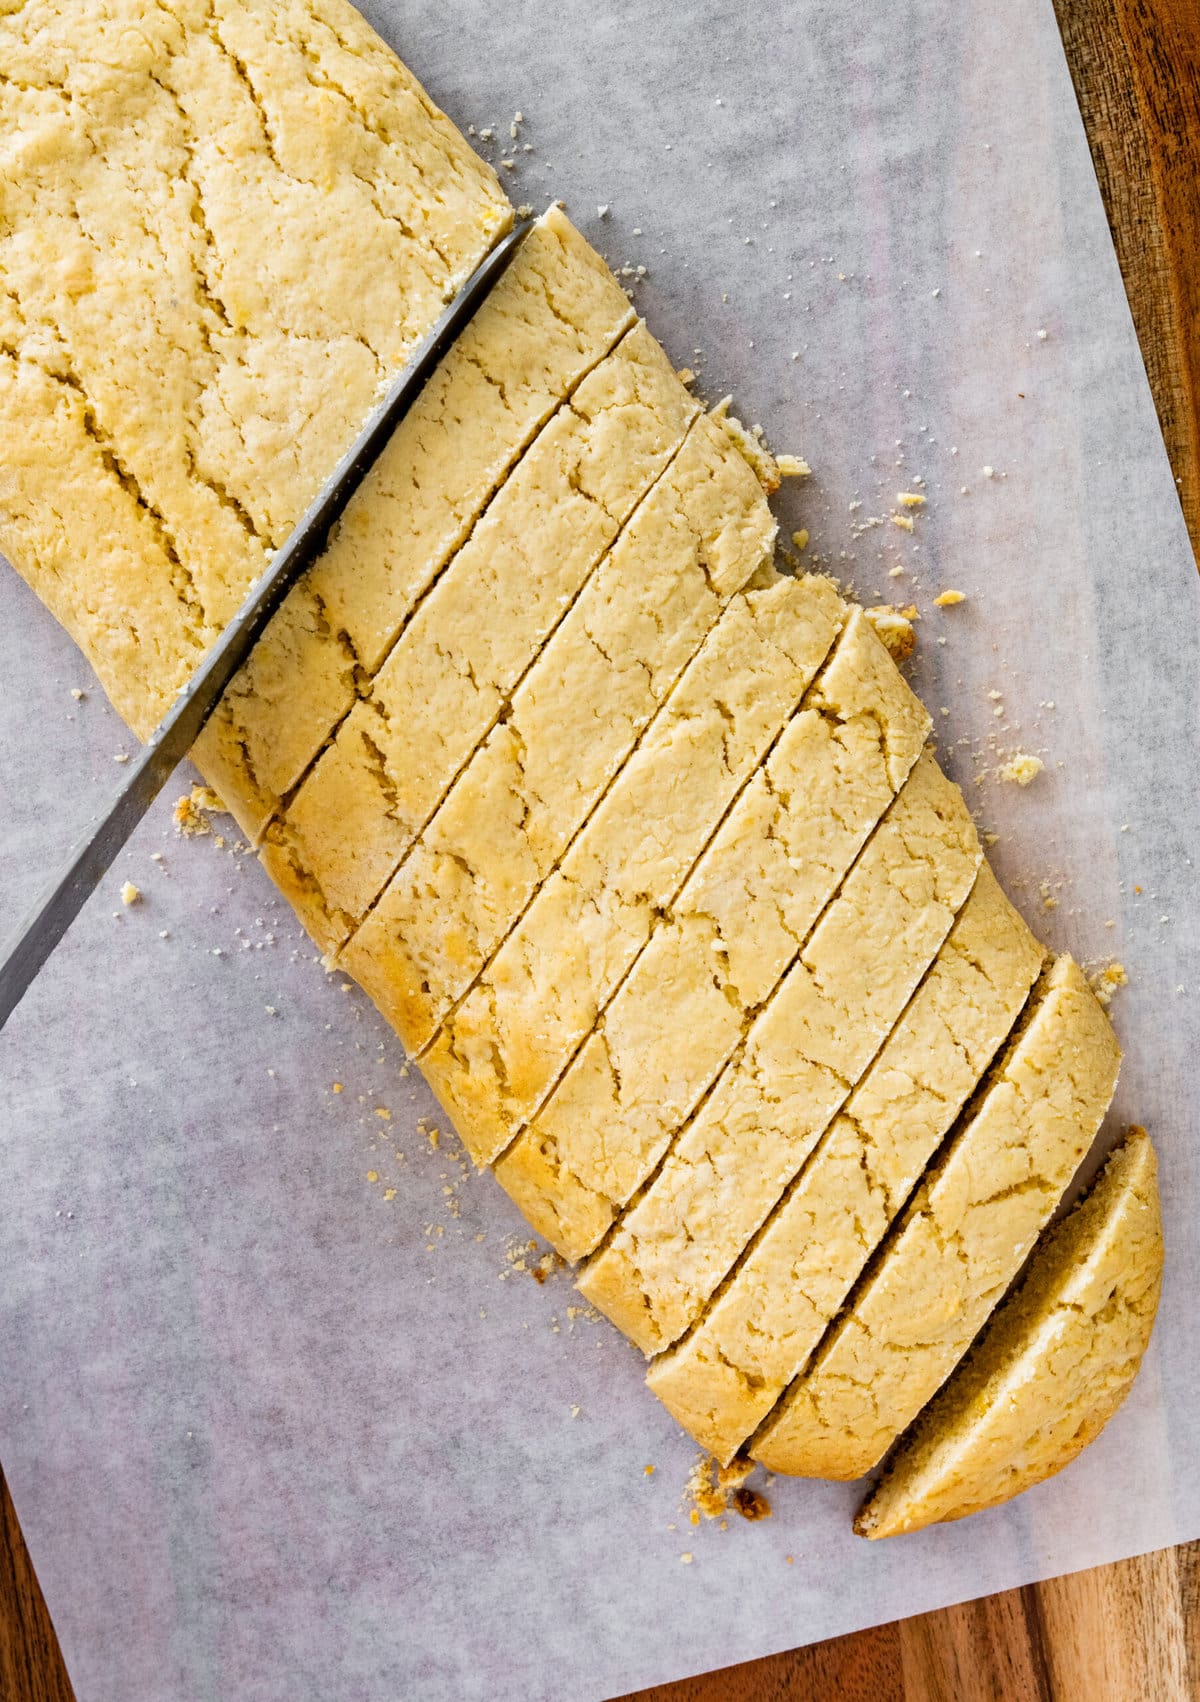 How to make Best Lemon Biscotti Recipe Step-by-Step: slicing the cookie logs into thin cookies.